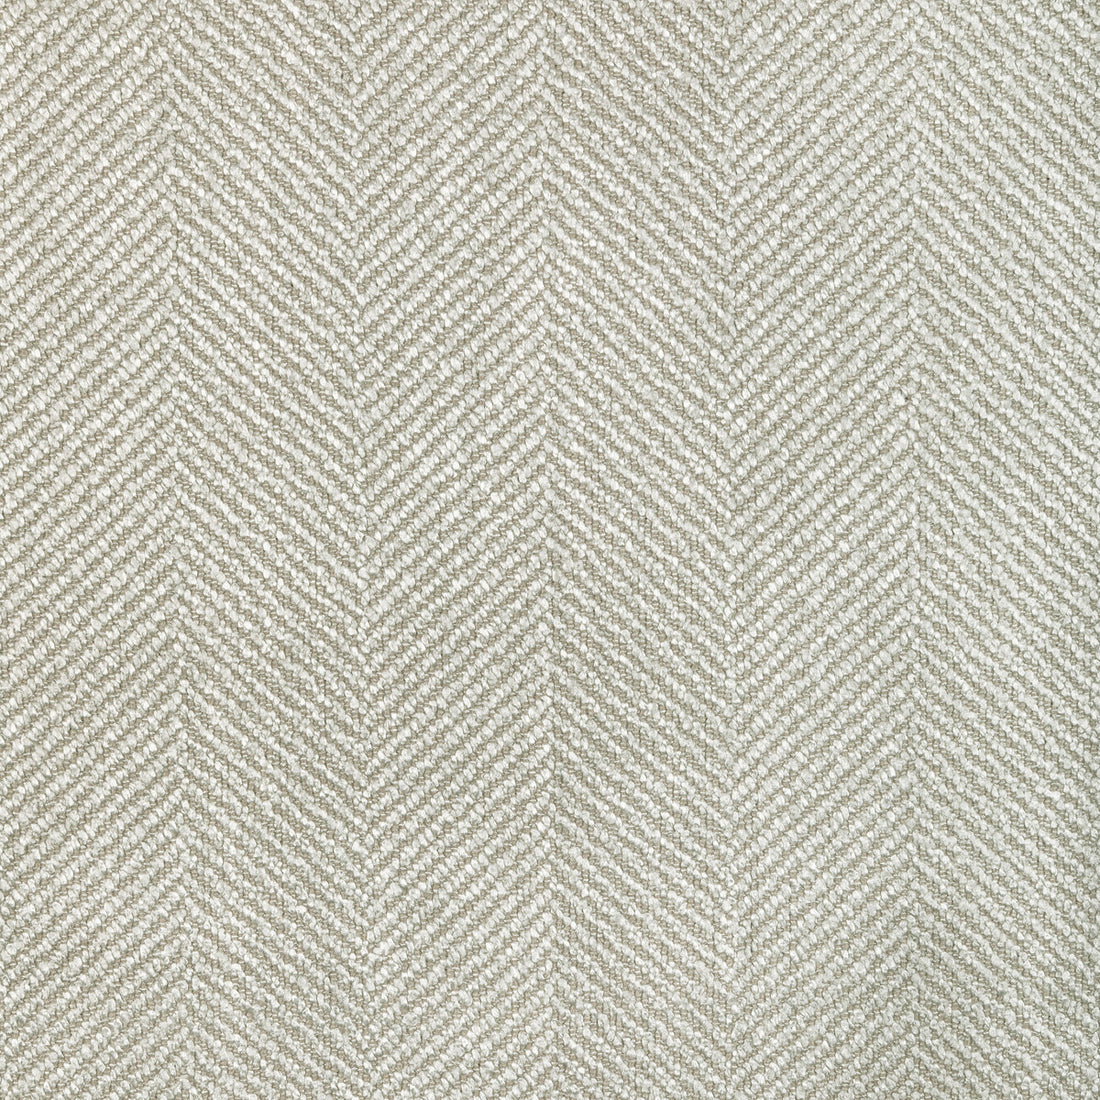 Kravet Smart fabric in 34631-1511 color - pattern 34631.1511.0 - by Kravet Smart in the Performance Crypton Home collection